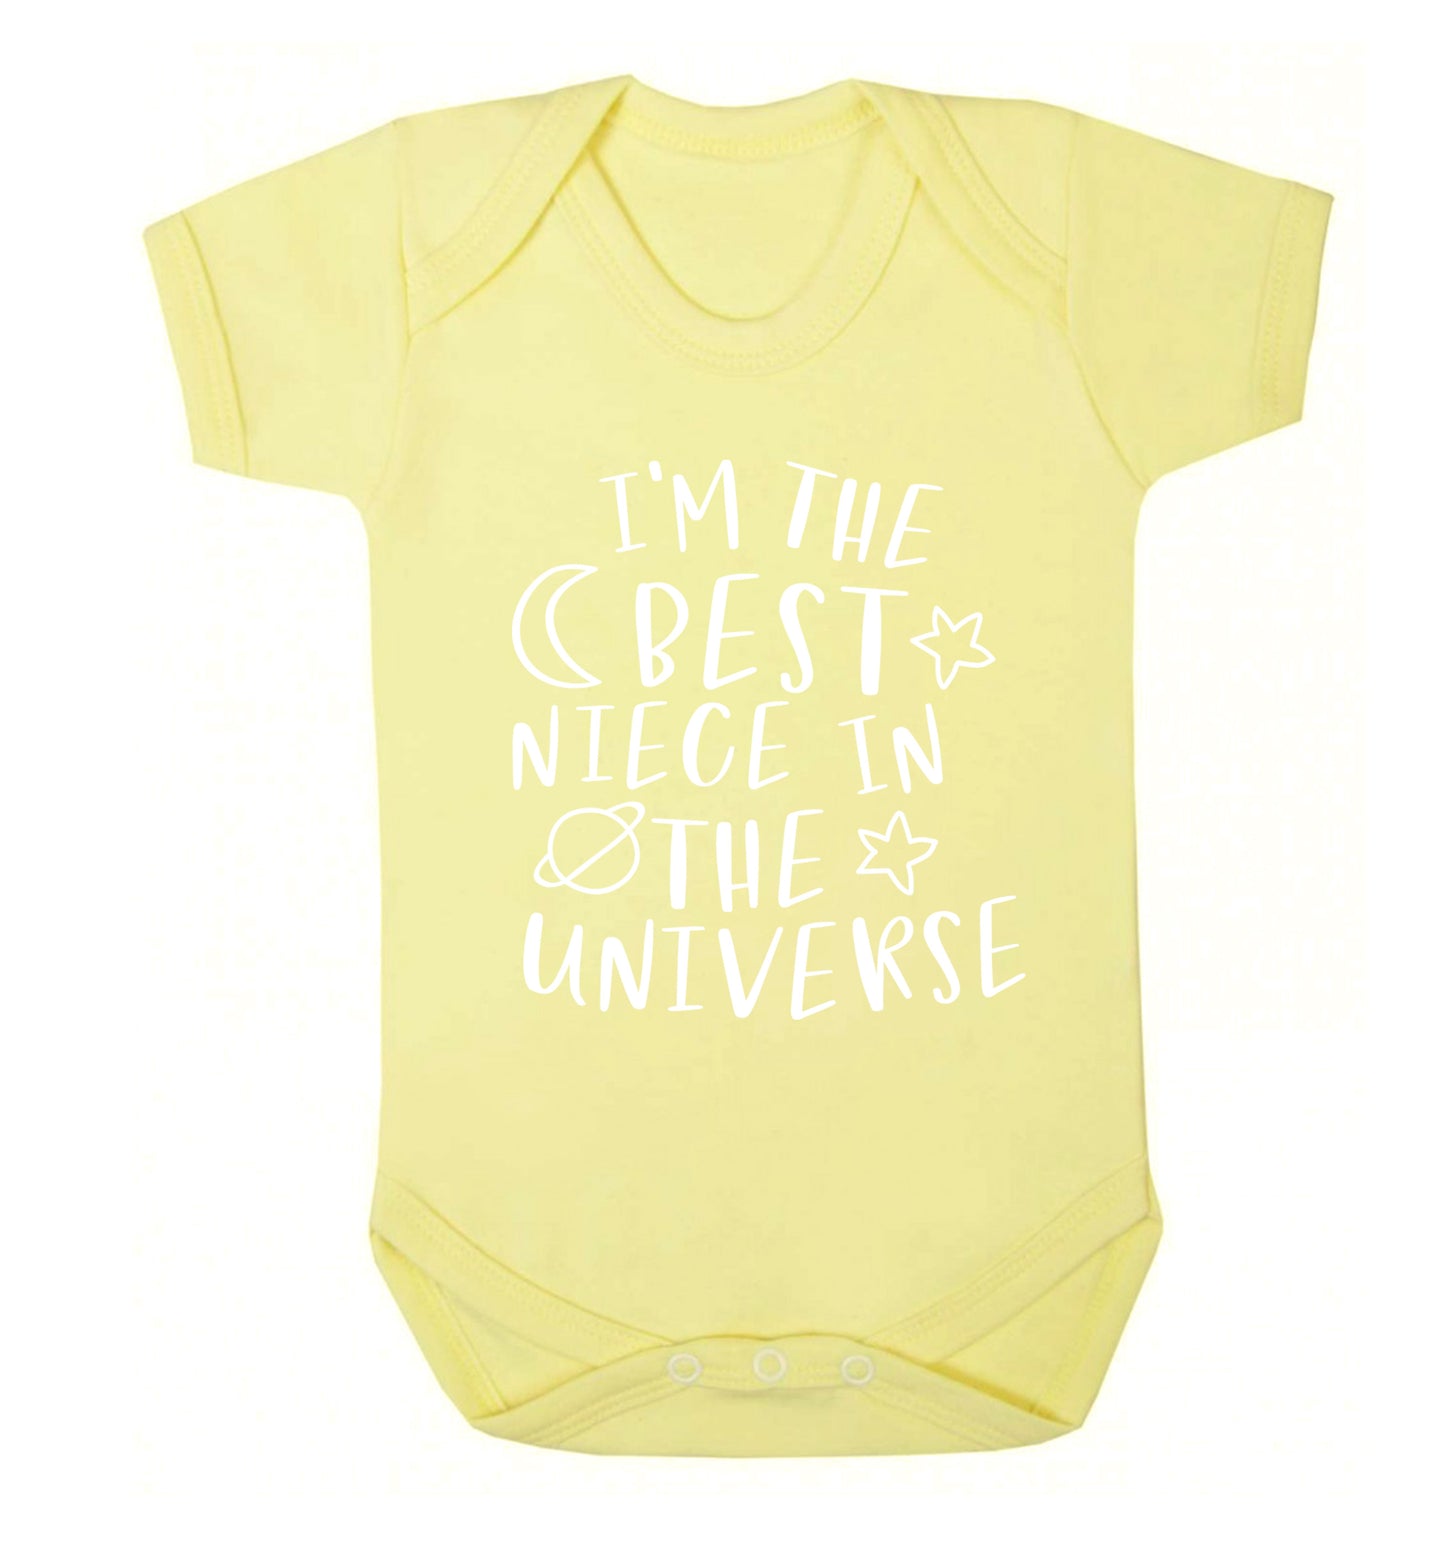 I'm the best niece in the universe Baby Vest pale yellow 18-24 months